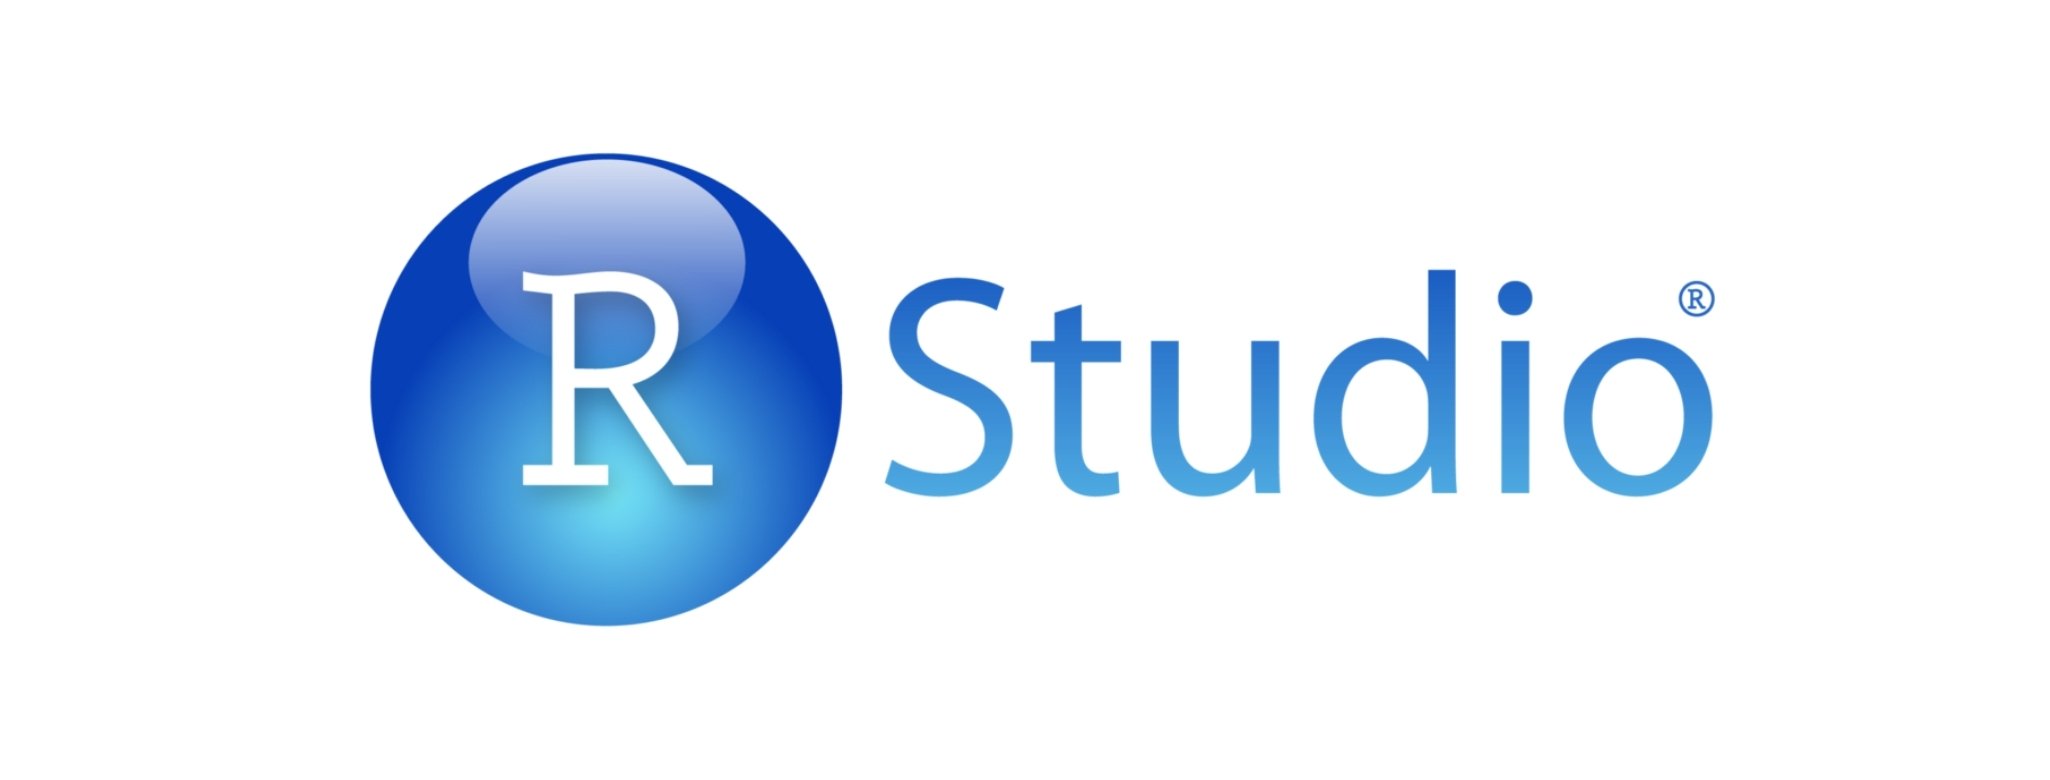 How To Get Started With R and RStudio